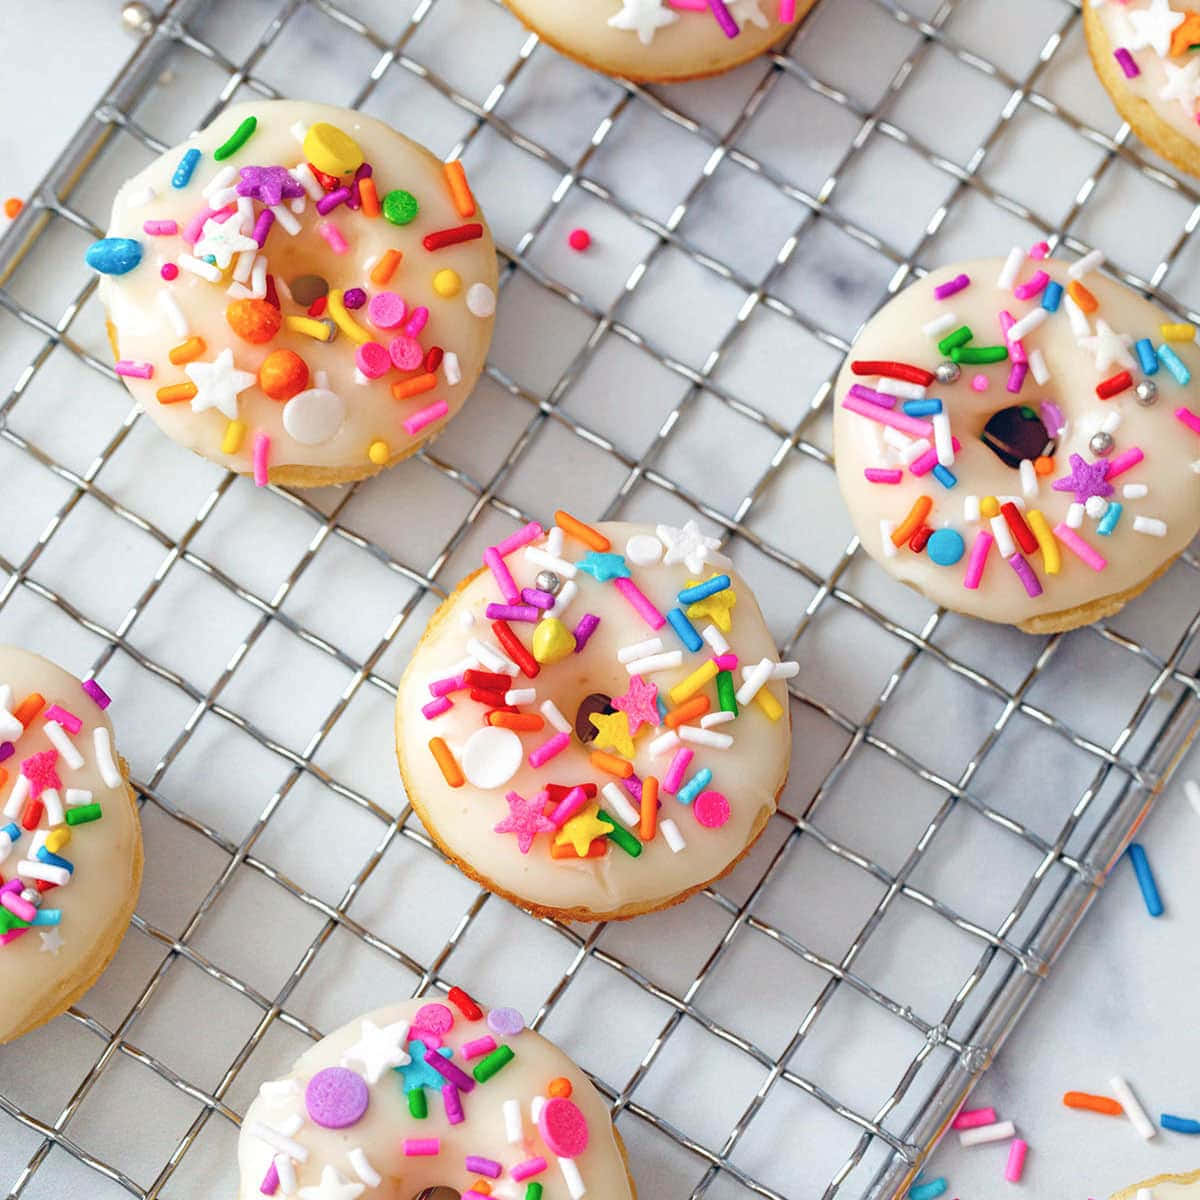 A Rack Of Donuts With Sprinkles